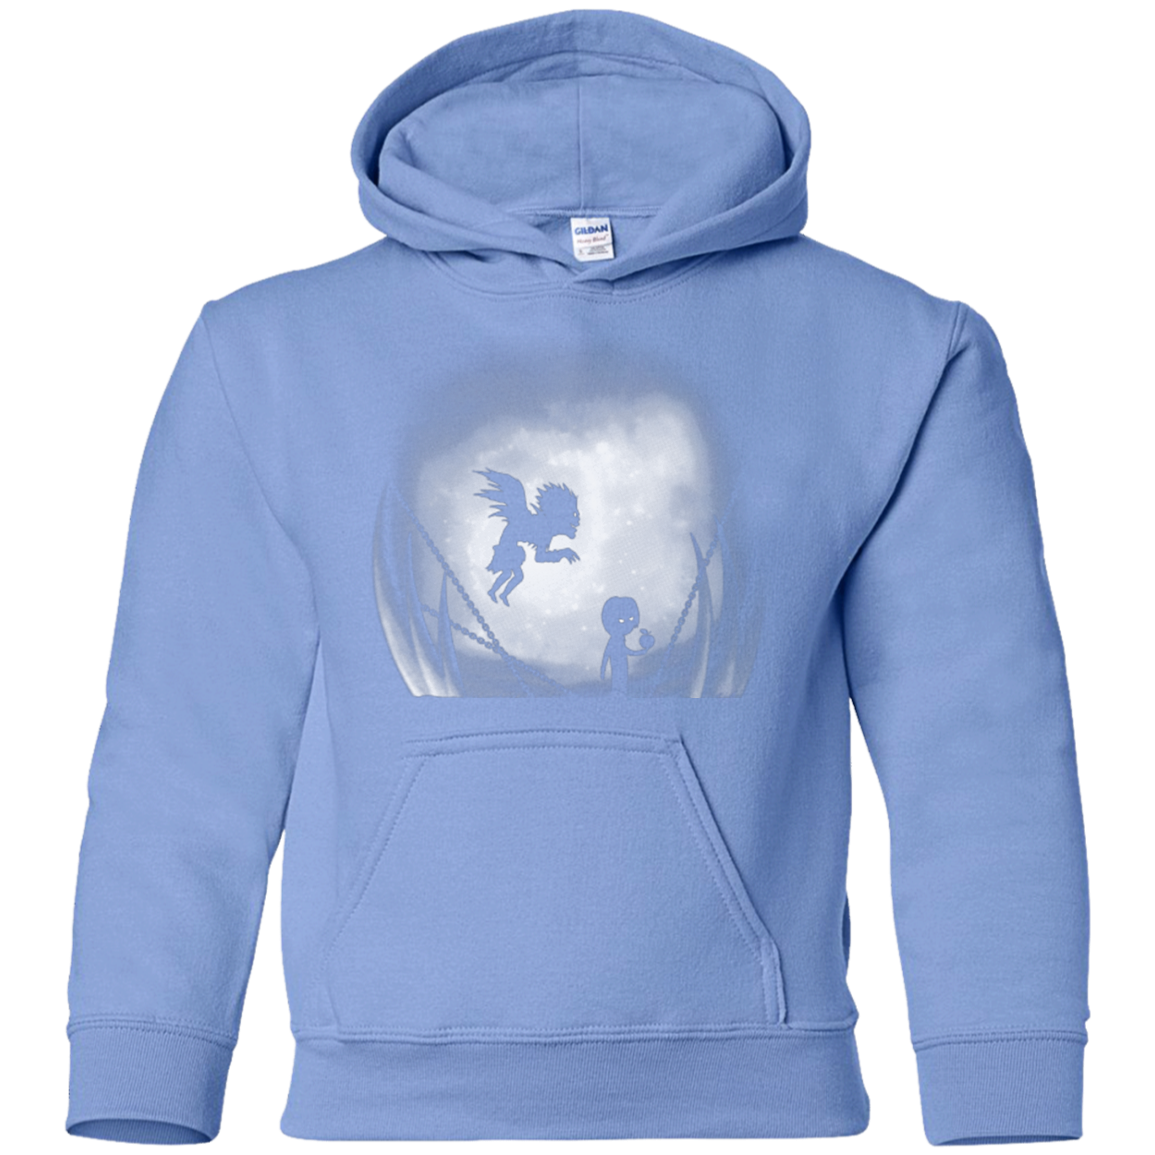 Light in Limbo Youth Hoodie